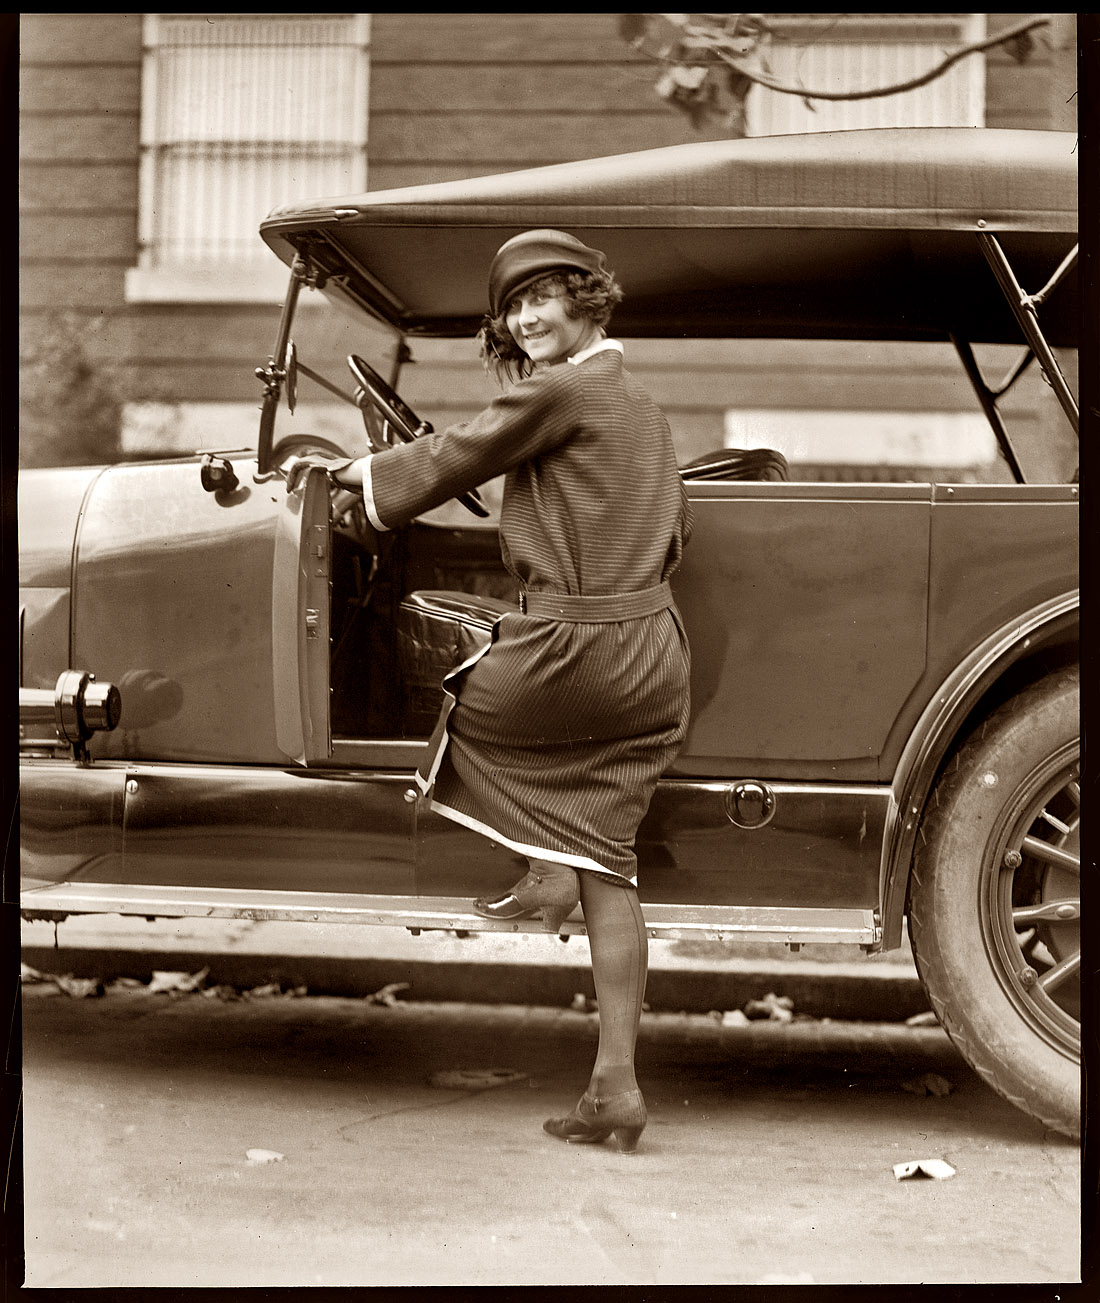 Miss Laura Bryn, daughter of the Norway's ambassador to Washington, gets into her car on November 2, 1922. View full size. National Photo Co. Collection.